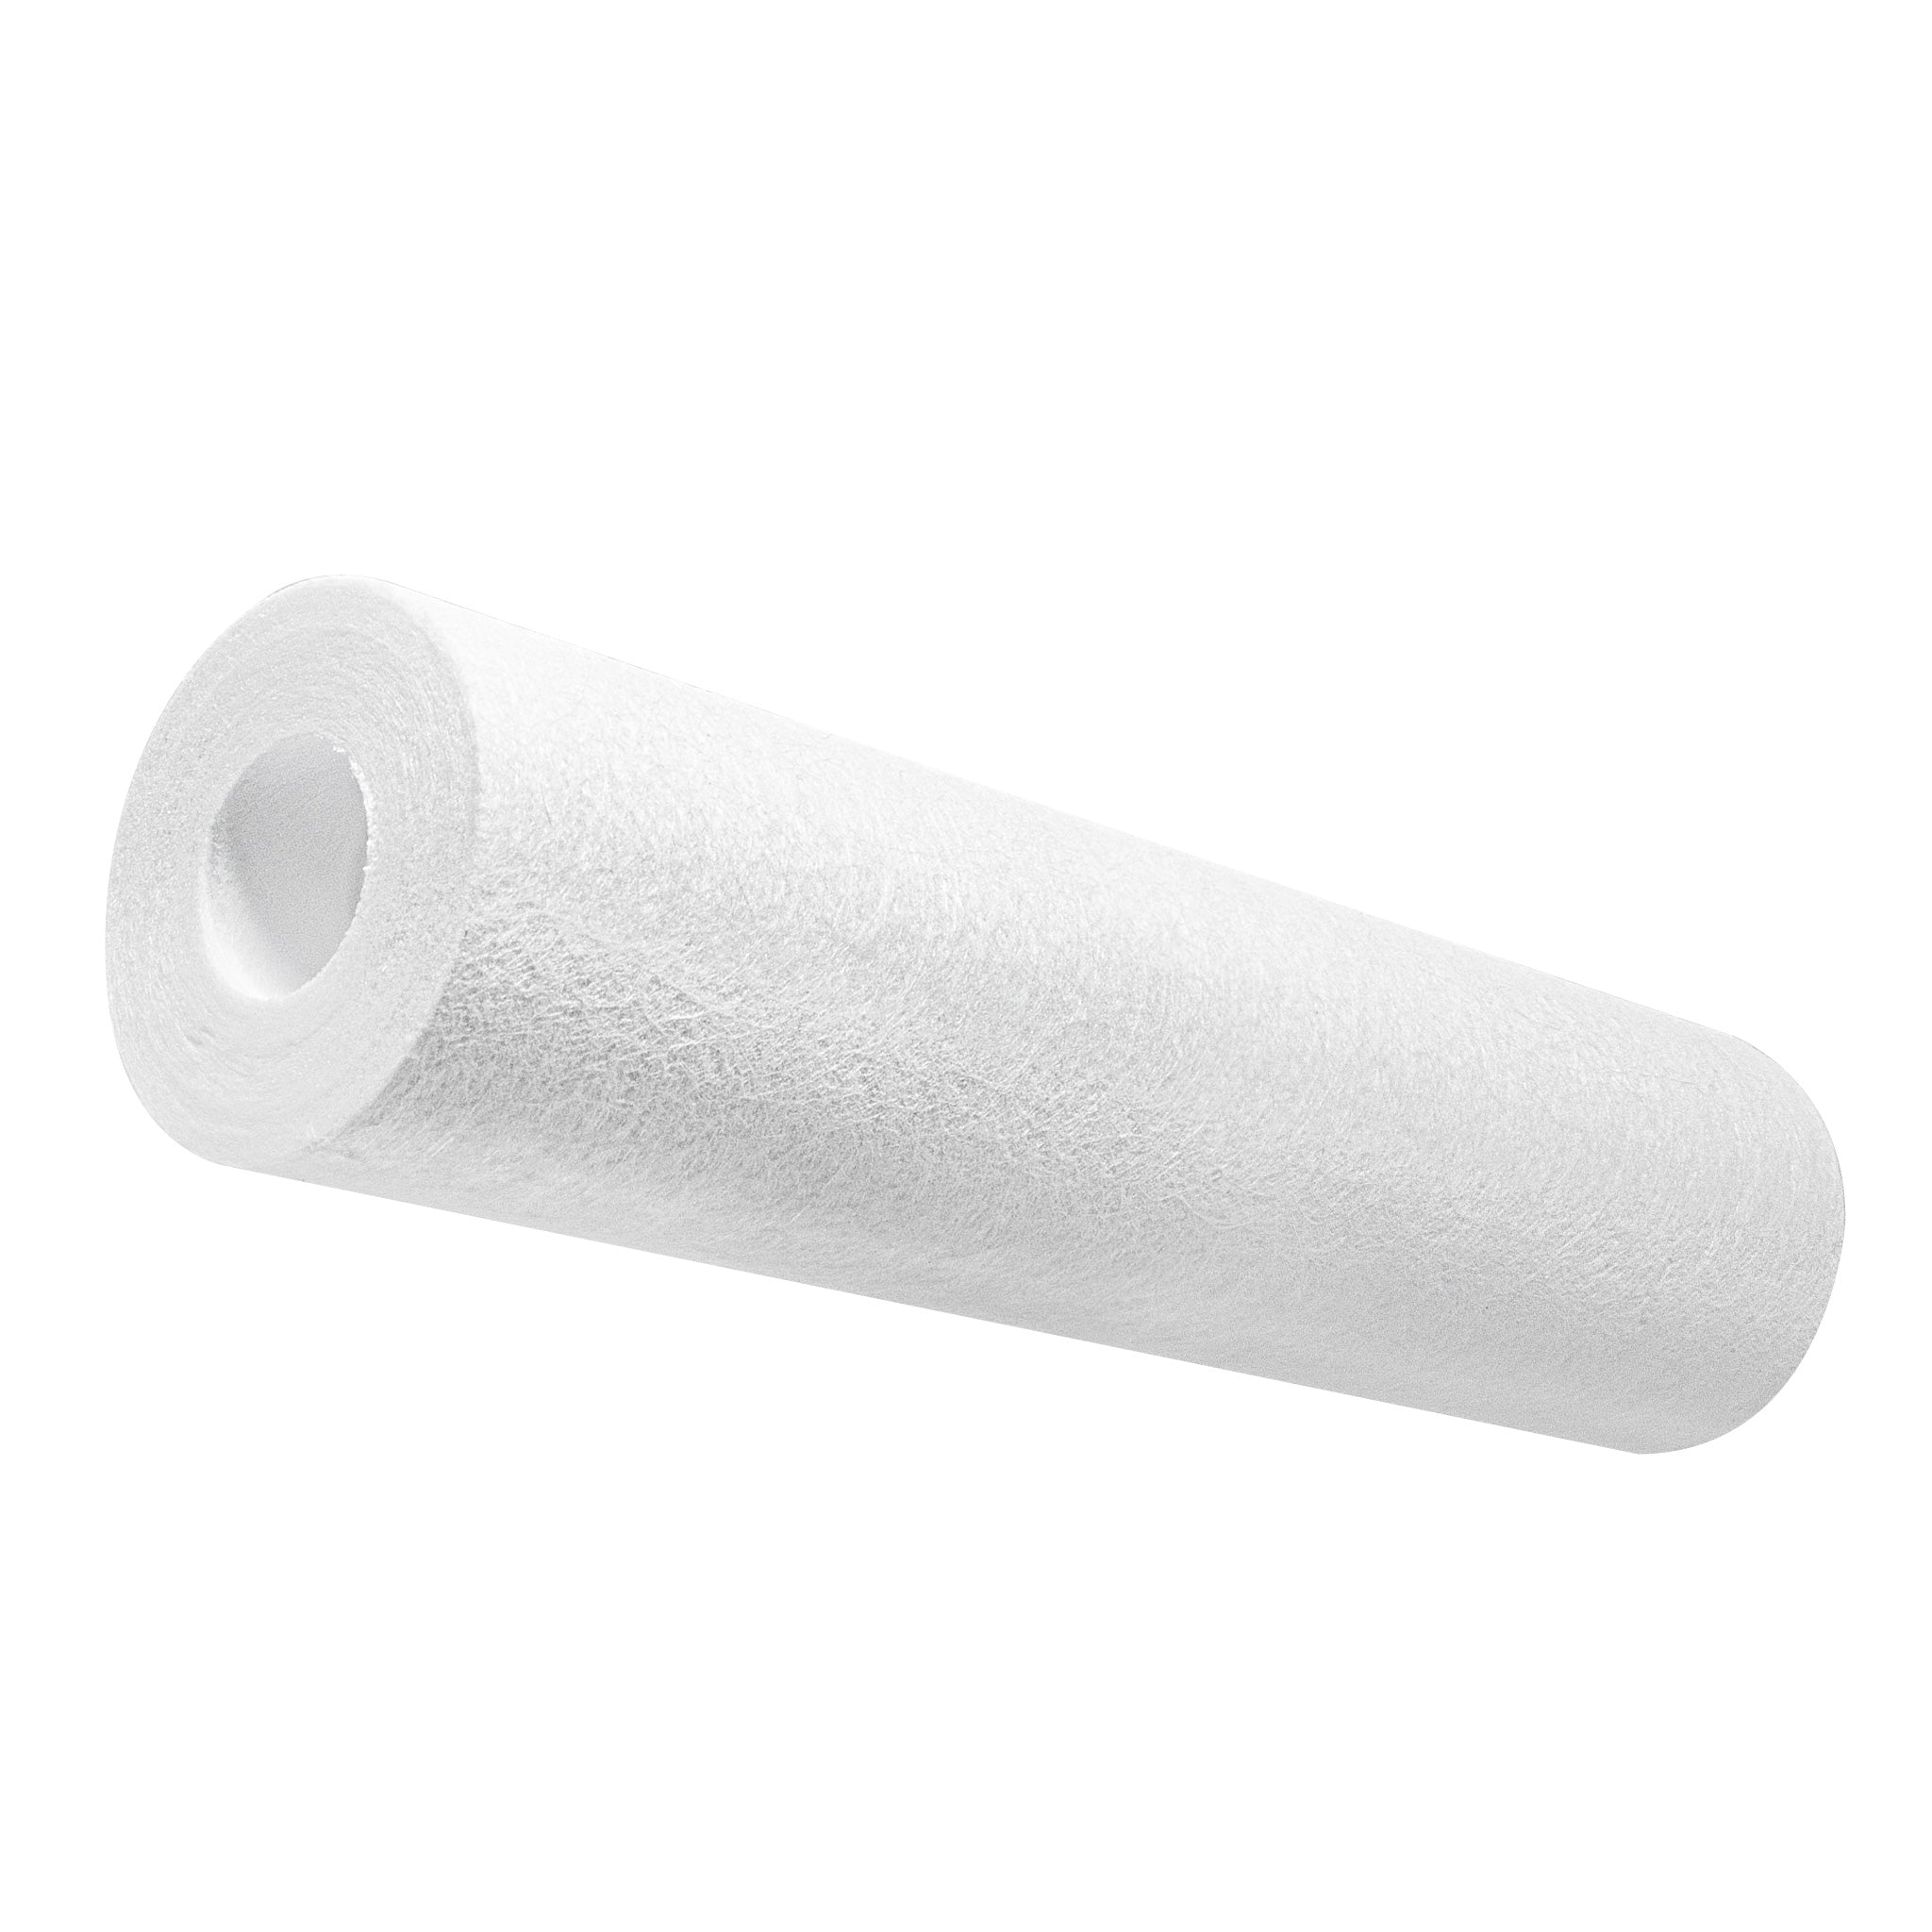 Metpure 10" x 2.5" Whole House Sediment Water Filter Cartridge - 5 Micron Melt-Blown Polypropylene 10-inch Universal Water Filter Replacement for Any Standard RO Drinking Water System, Whole House Filtration. Compatible with DuPont, Pentek DGD, and more.